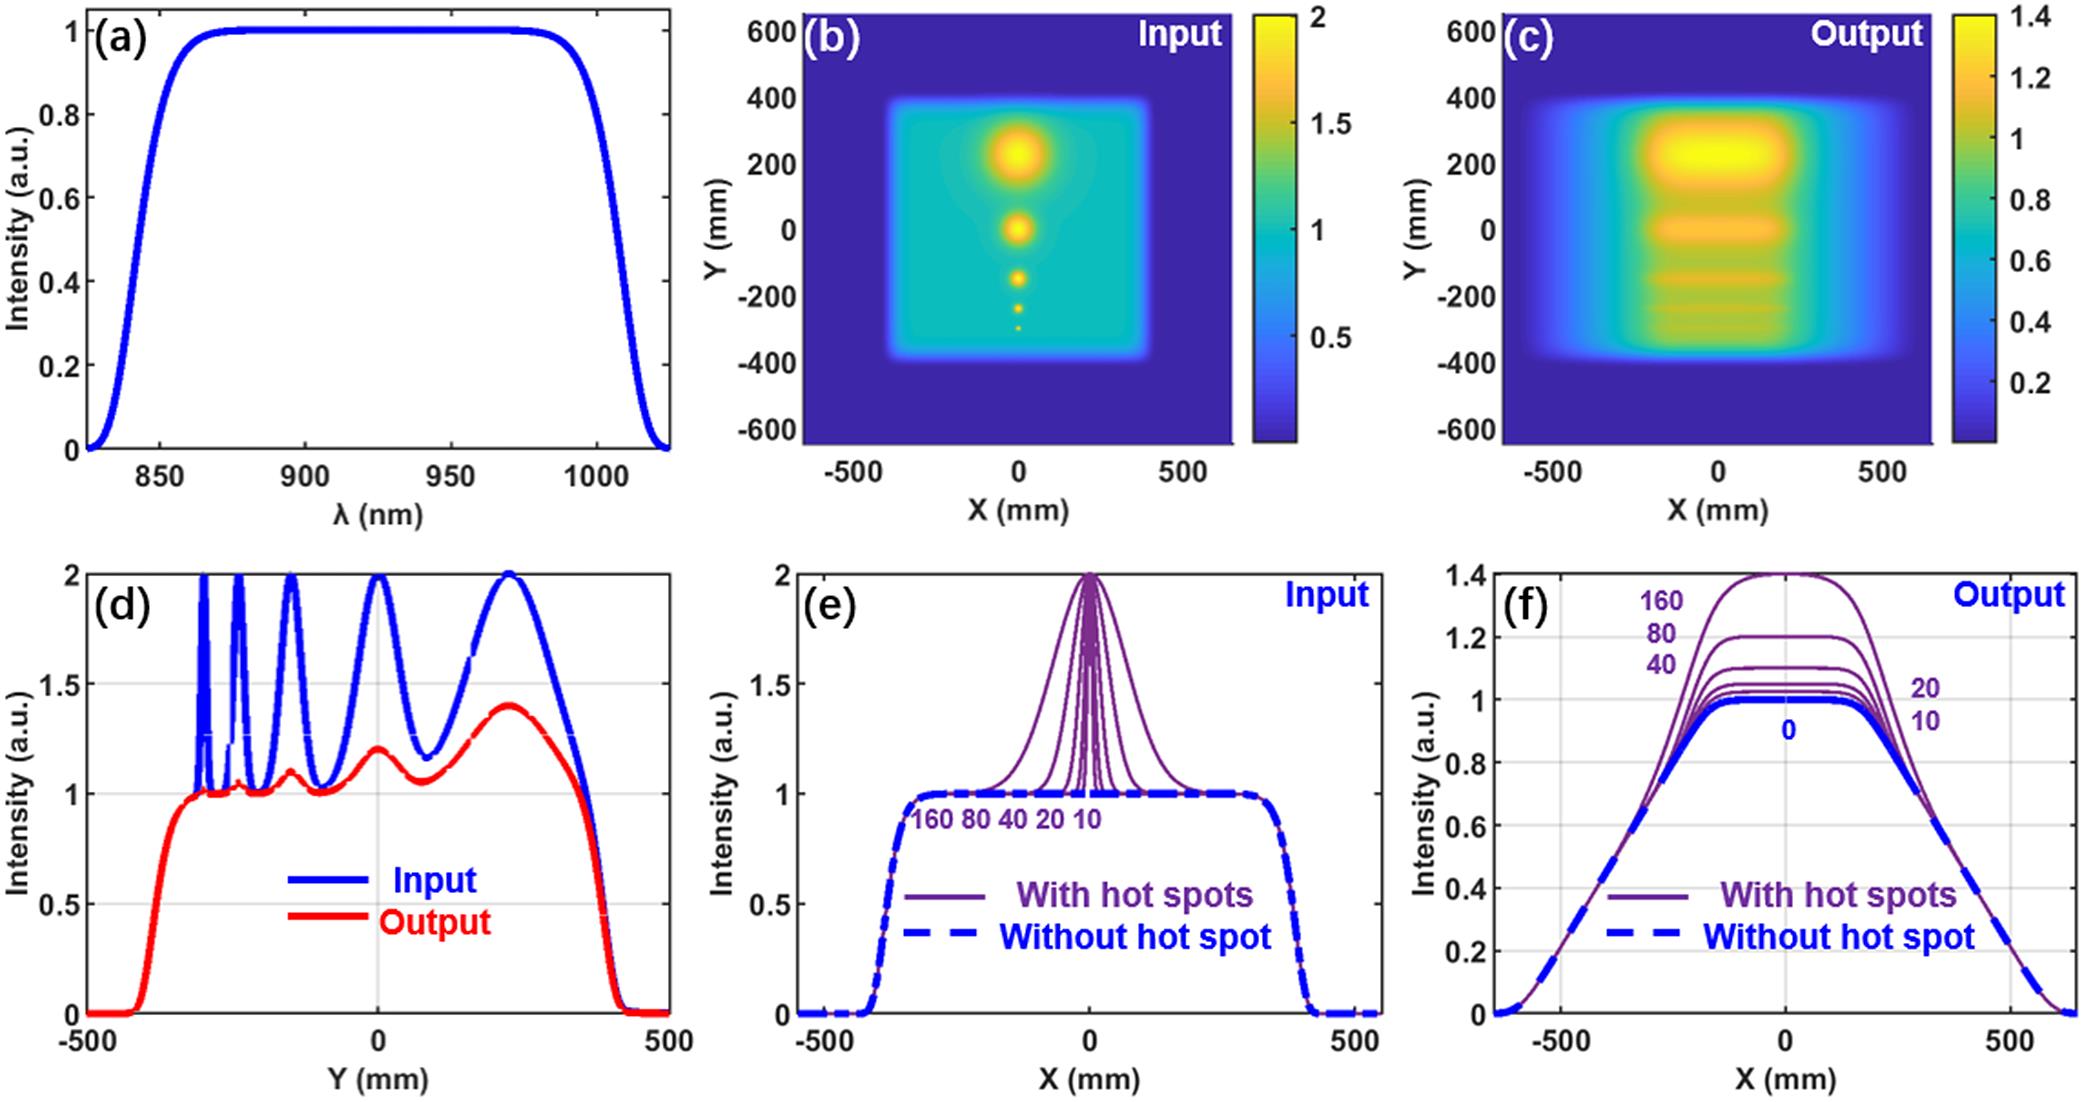 (a) Spectral profile. (b) Input beam with five Gaussian shape hot spots and different FWHM diameters (10, 20, 40, 80 and 160 mm, respectively). (c) Output beam from the SSGP compressor with the introduced 520 mm spatial chirp. (d) Intensity profiles at X = 0 of the input (blue curve) and output (red curve) beams in (b) and (c), respectively. (e) Intensity profiles without (dash blue curve) and with (solid purple curves) hot spots along the horizontal direction across the five peak points in (b). (f) Intensity profiles without (dash blue curve) and with (solid purple curves) hot spots along the horizontal direction across the five peak points in (c).